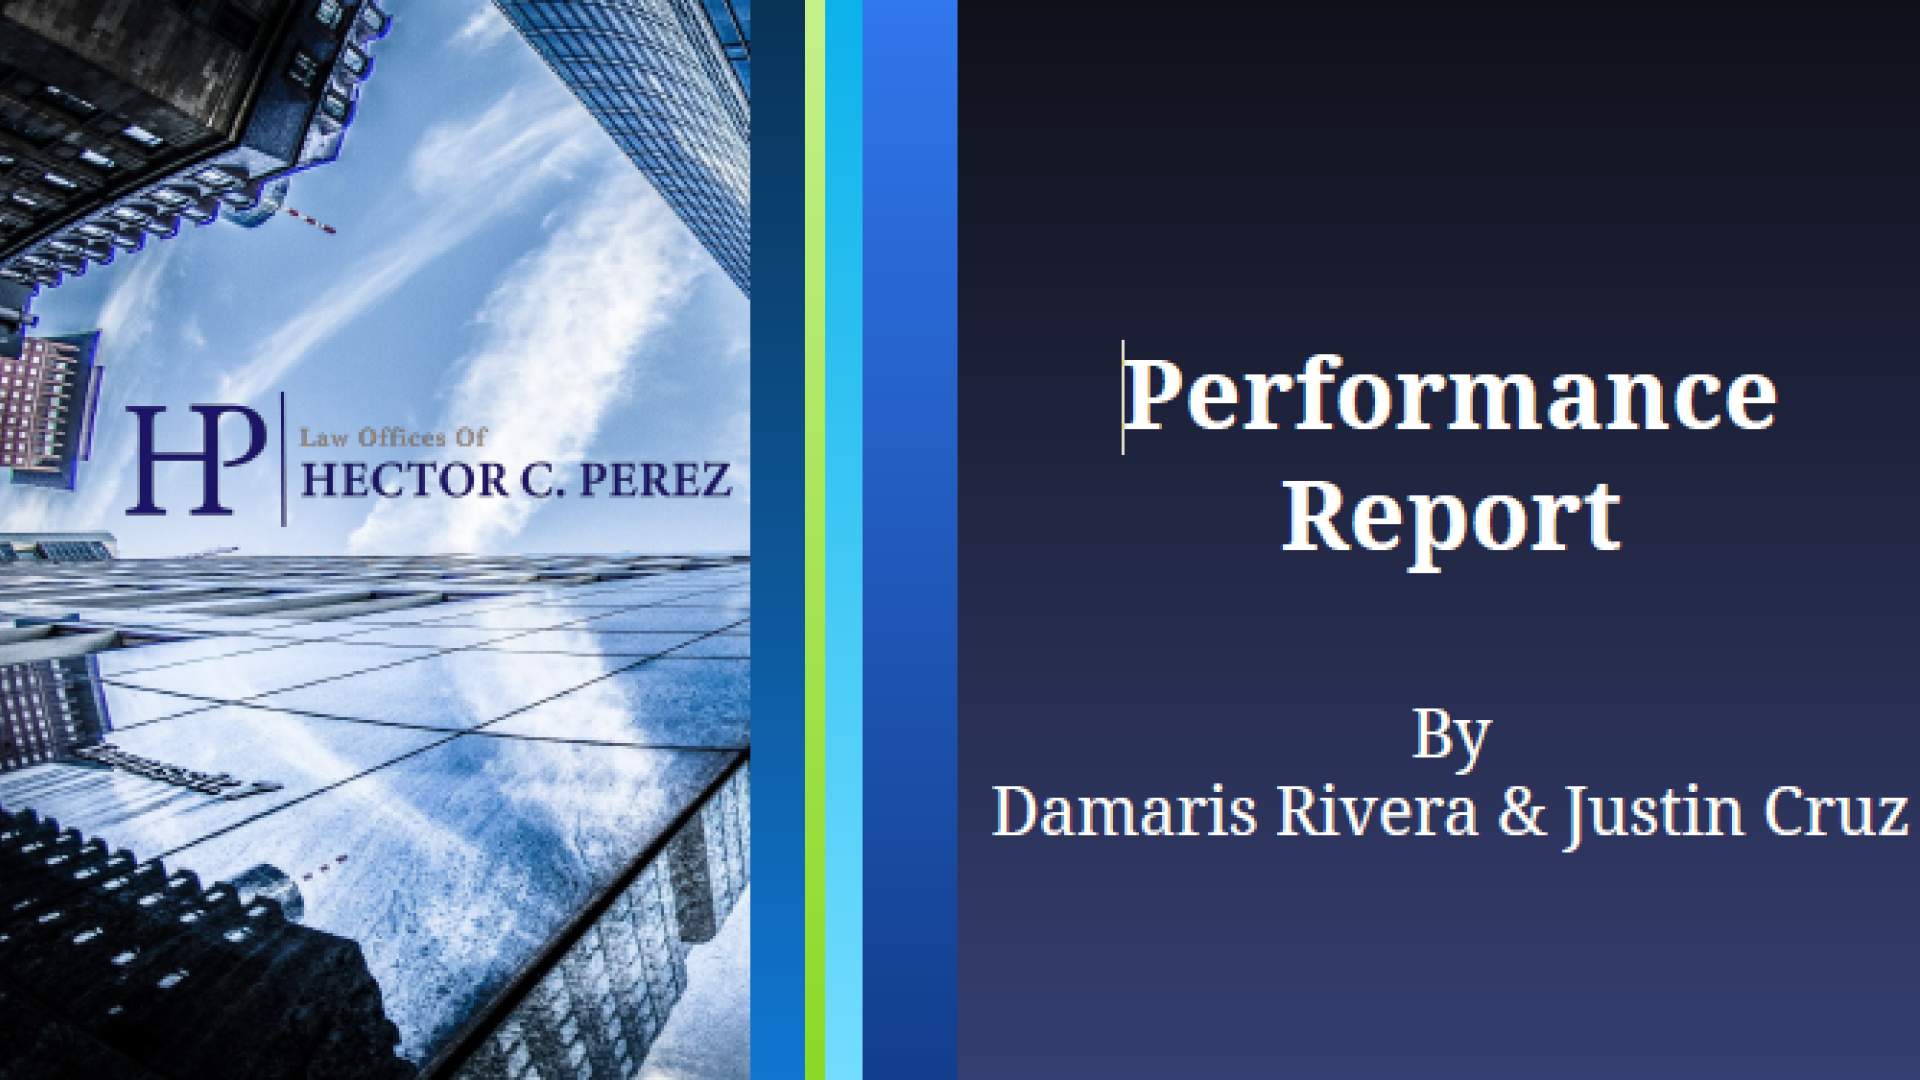 2019 Law Offices Hector c Perez Performance Report